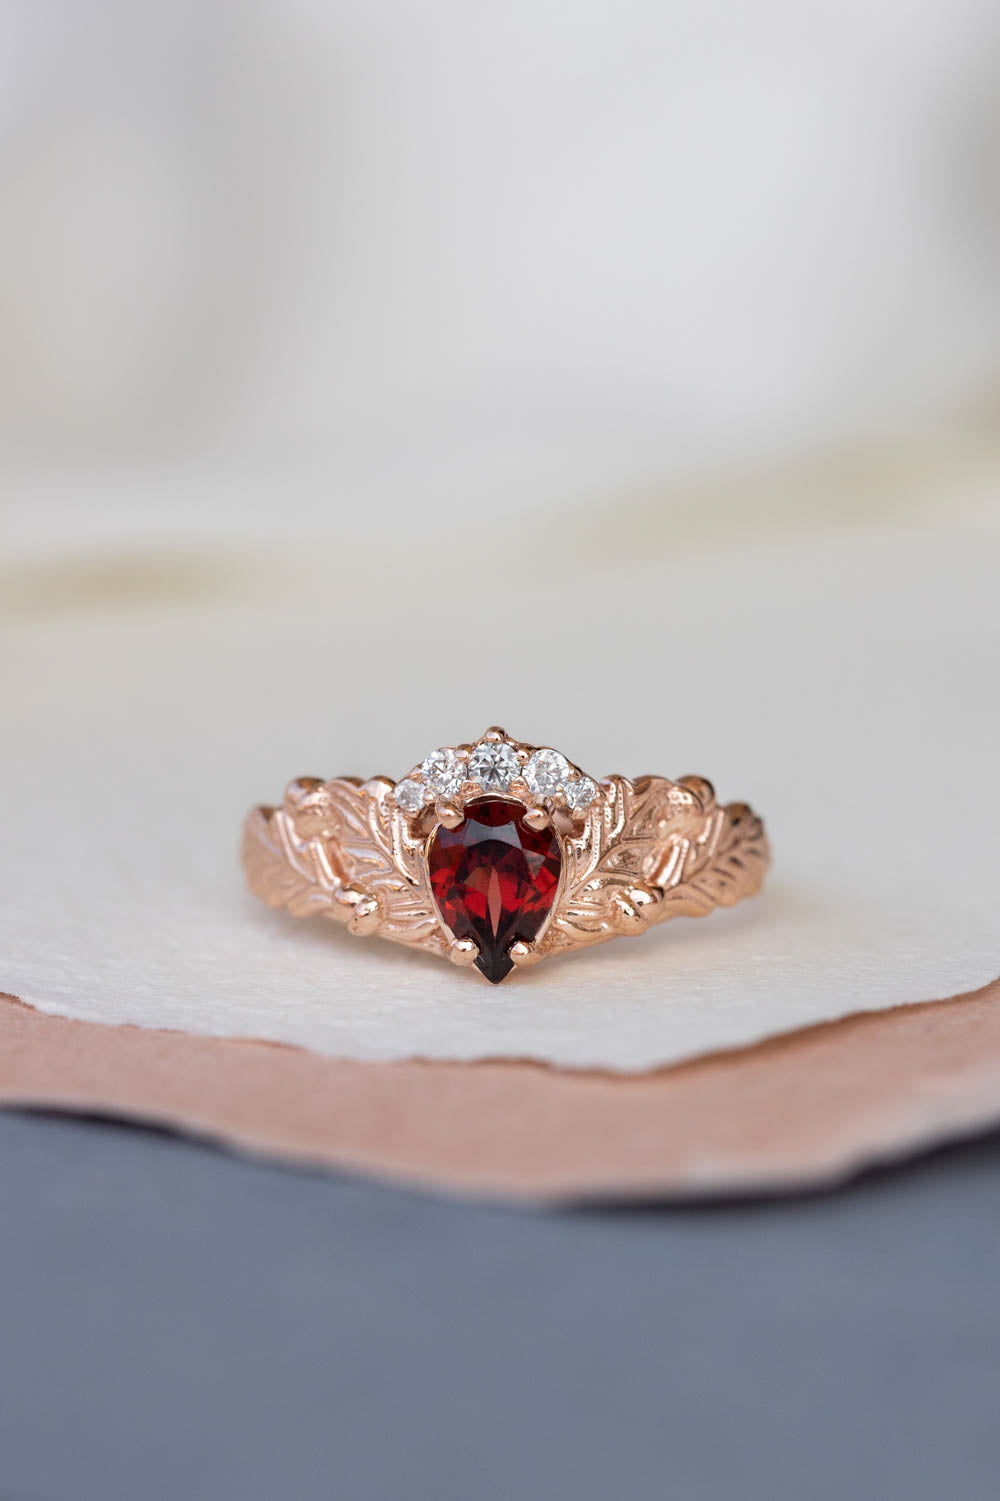 Diamond crown and garnet engagement ring, gorgeous nature inspired proposal ring / Royal Oak - Eden Garden Jewelry™